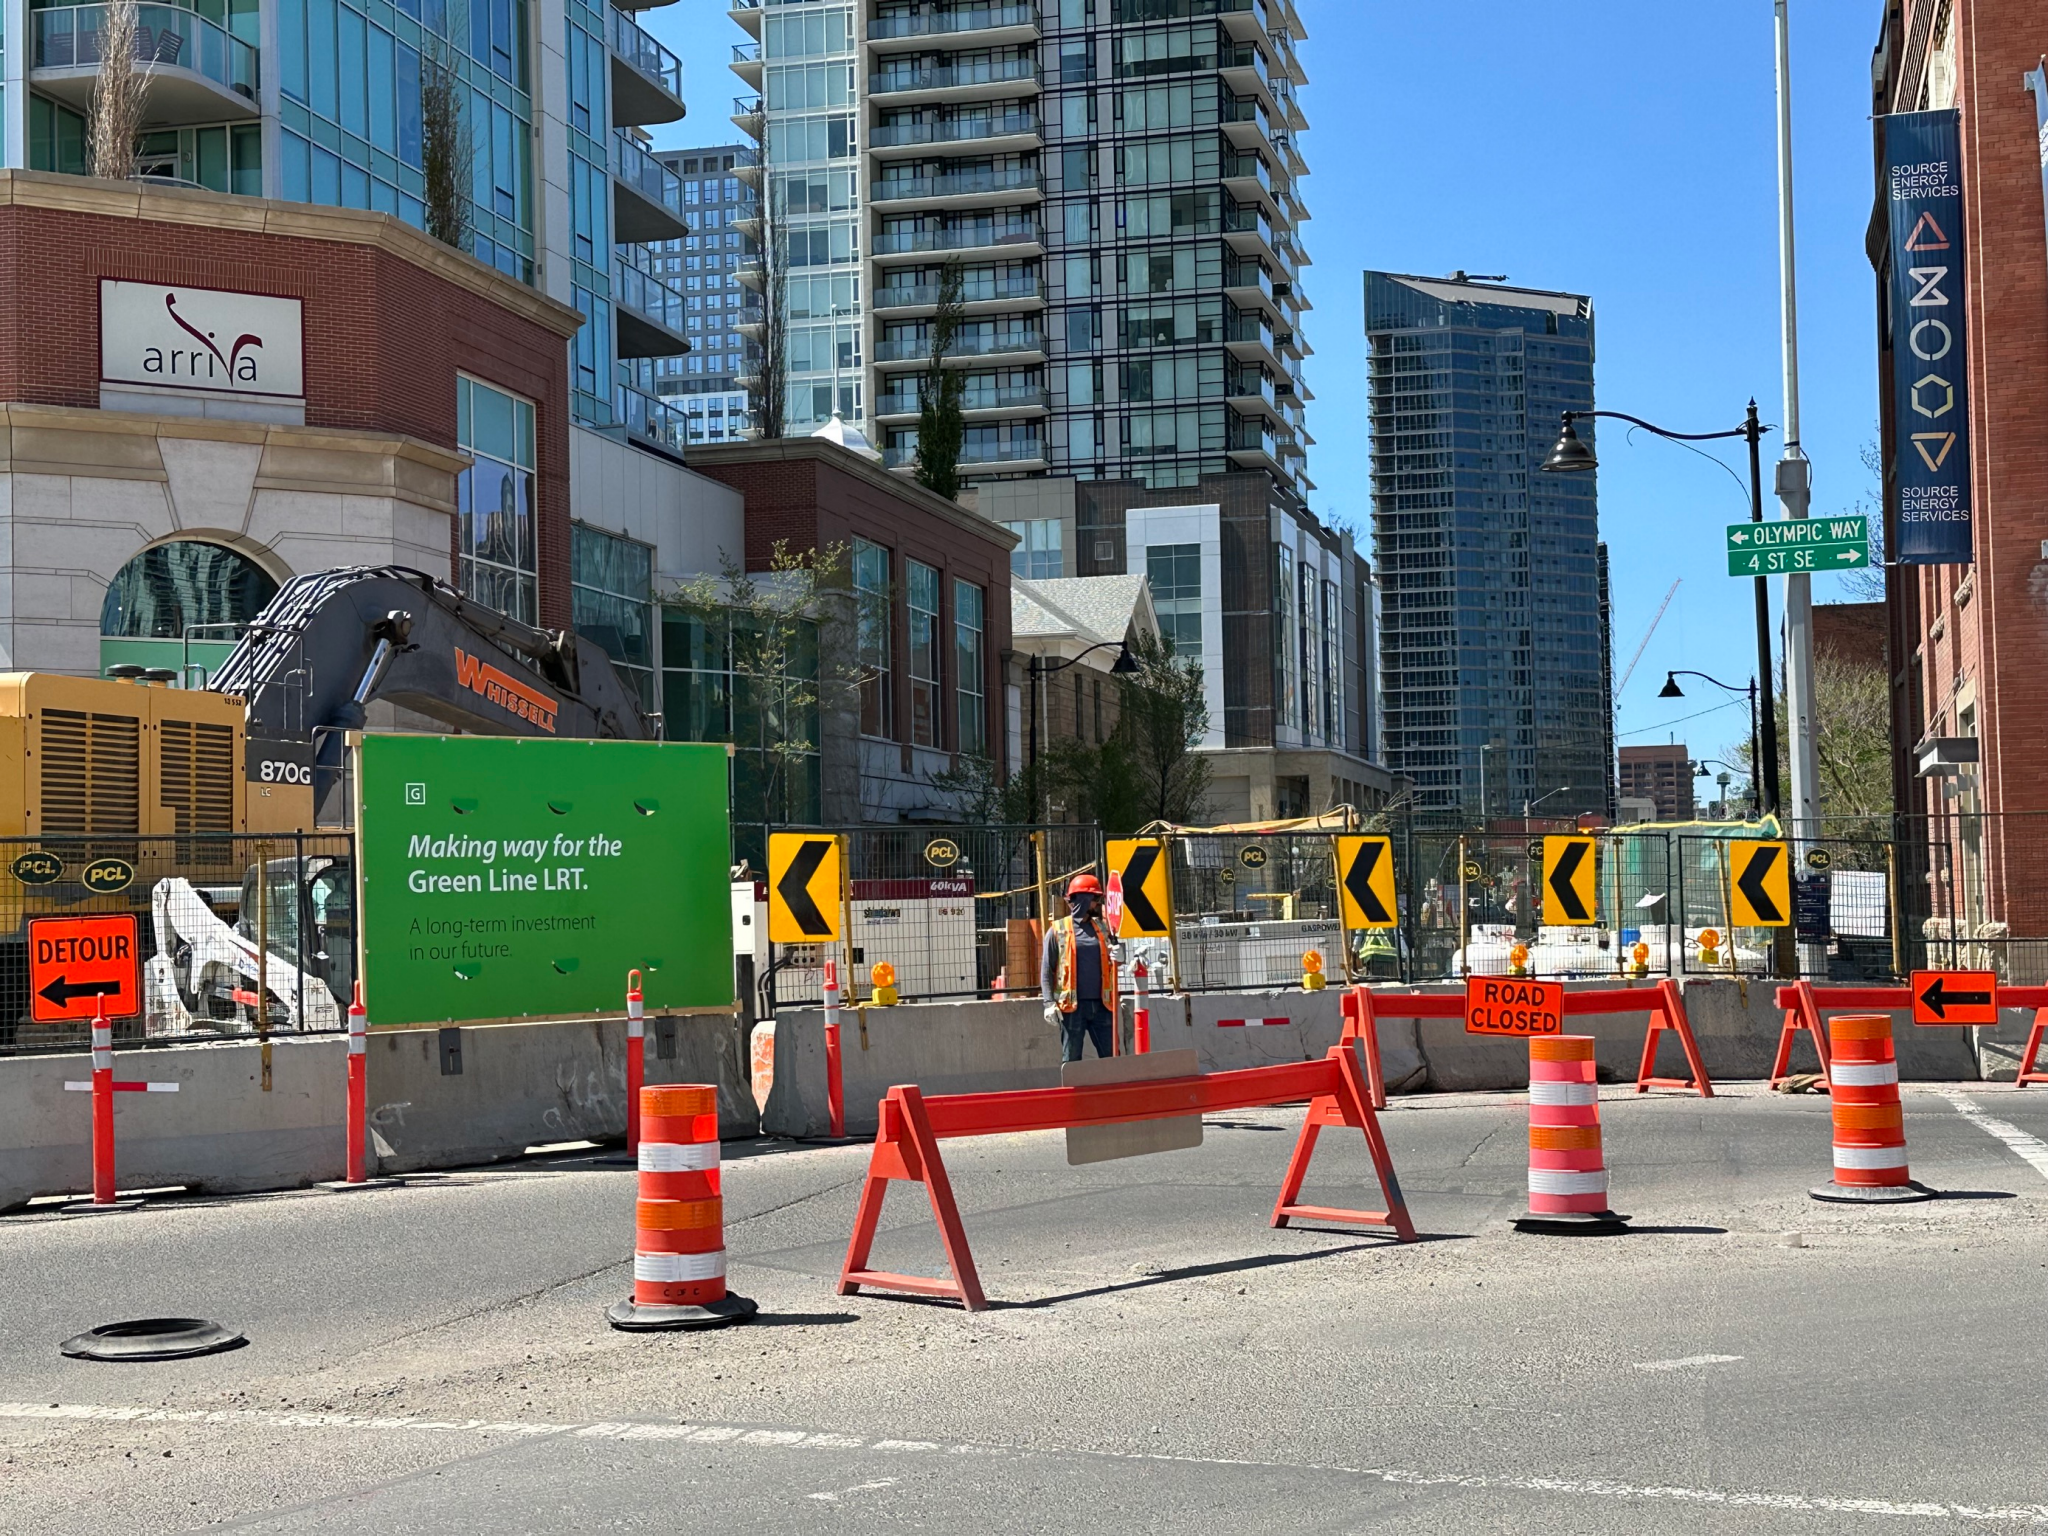 Construction to make way for the Green Line LRT occurring at Olympic Way and 4 Street S.E.